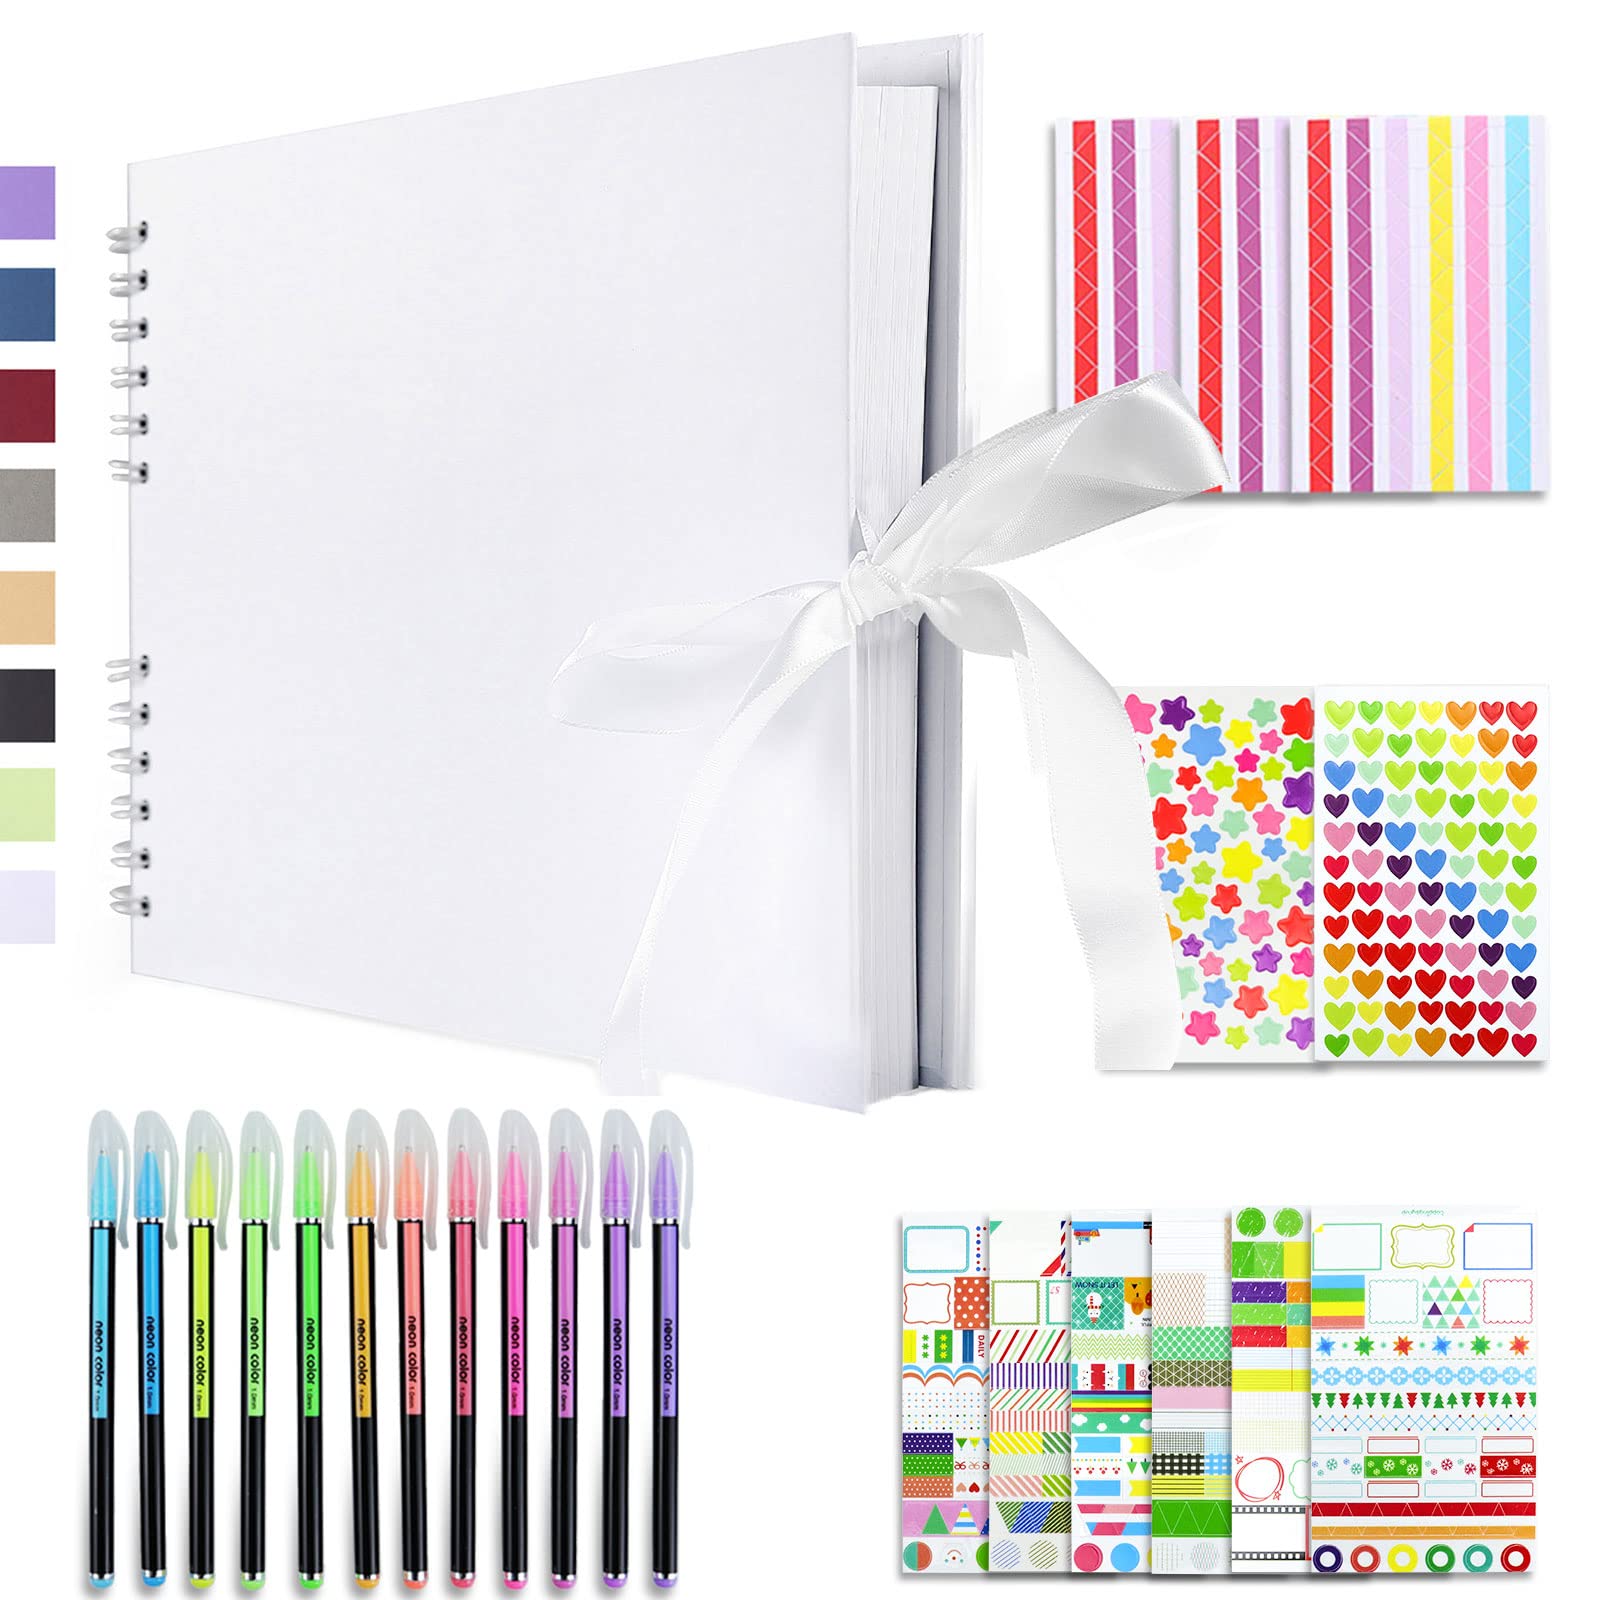 Vienrose Scrapbook Photo Album DIY Set with Stickers and Colorful Pens  Hardcover Pictures Book 11x8 Inches 80 Black Pages for Wedding Birthday  Gift 11x8 inches White